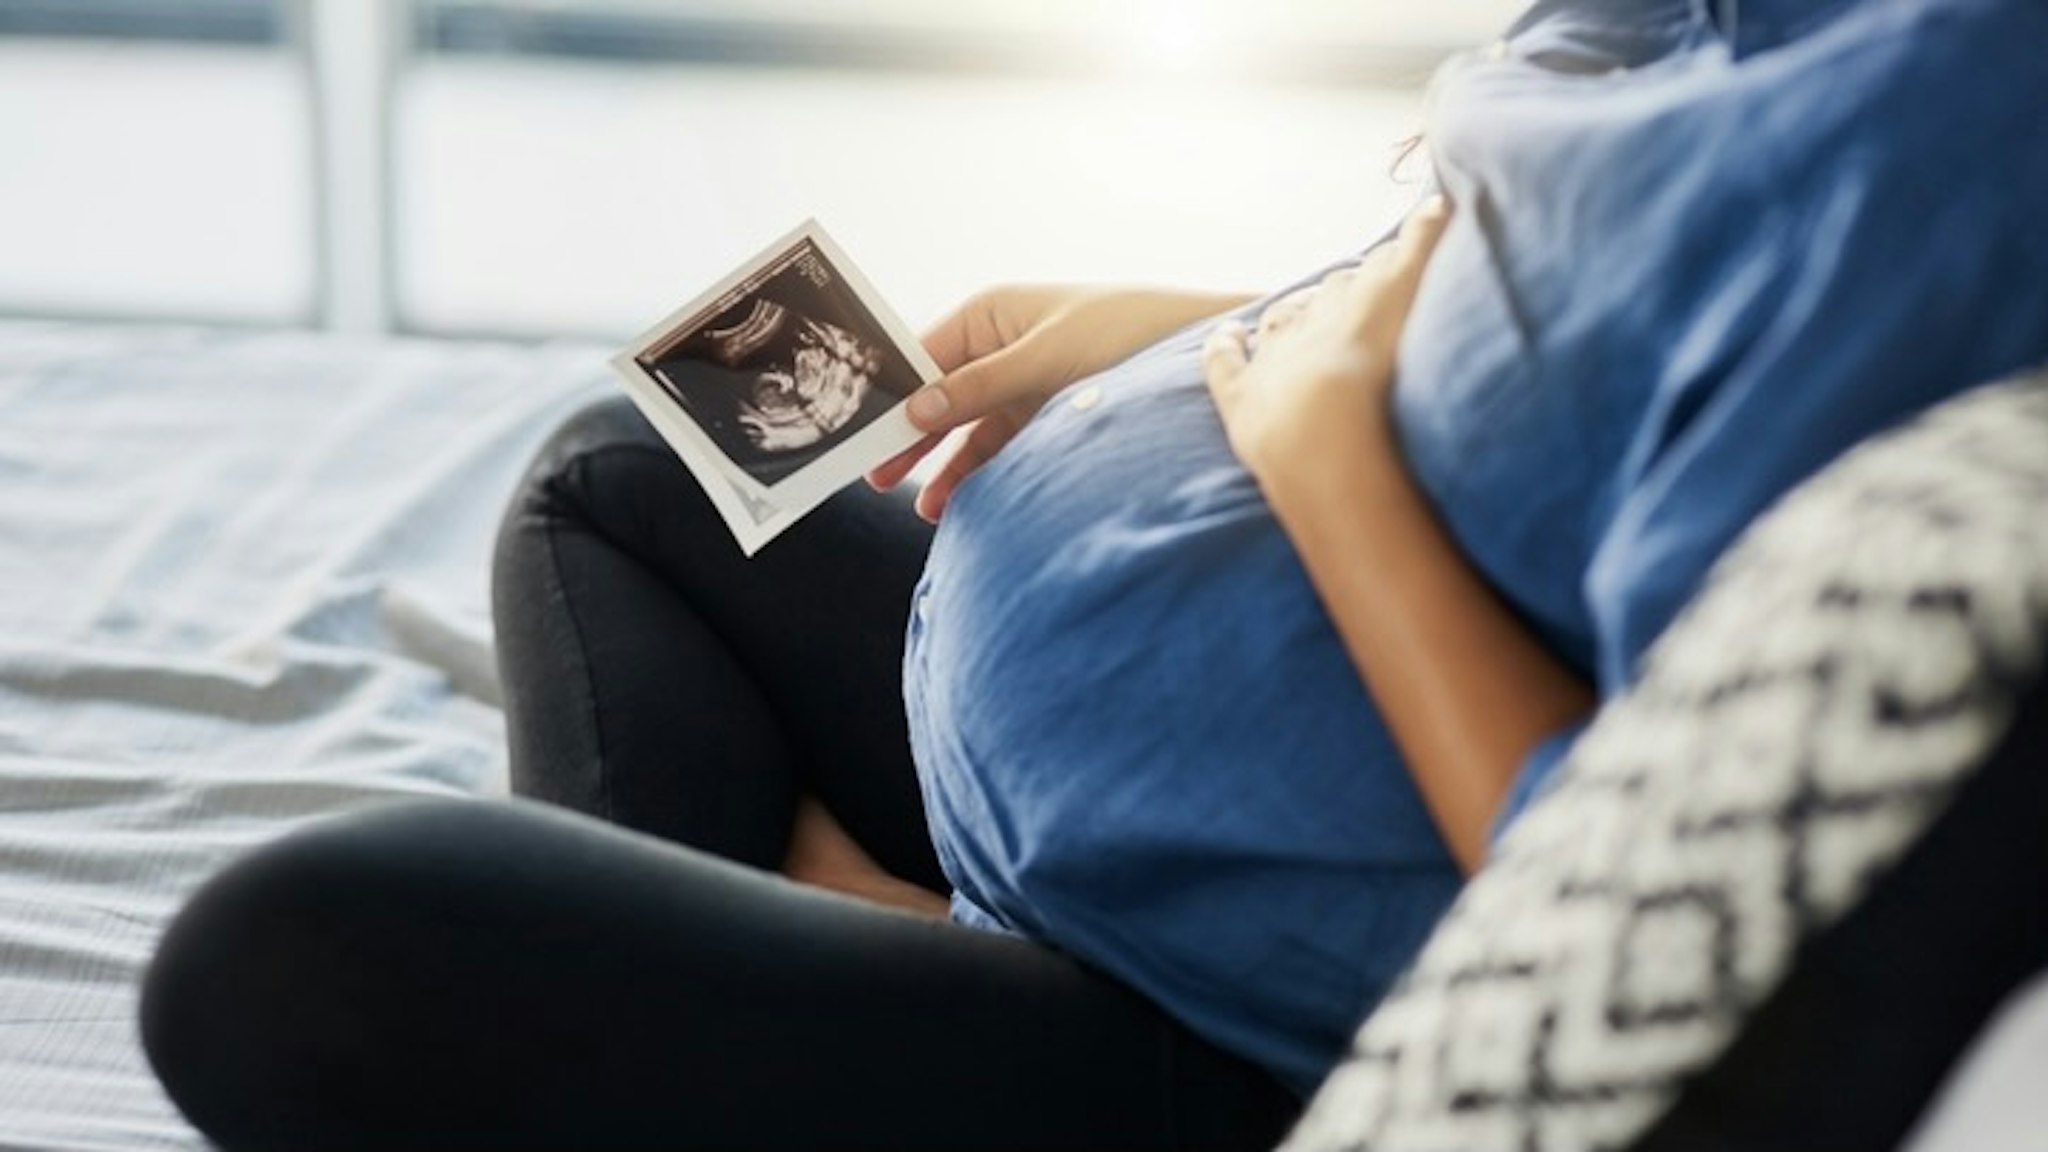 The beginning of a beautiful bond - stock photo Closeup shot of an unrecognizable pregnant woman holding an ultrasound scan Adene Sanchez via Getty Images